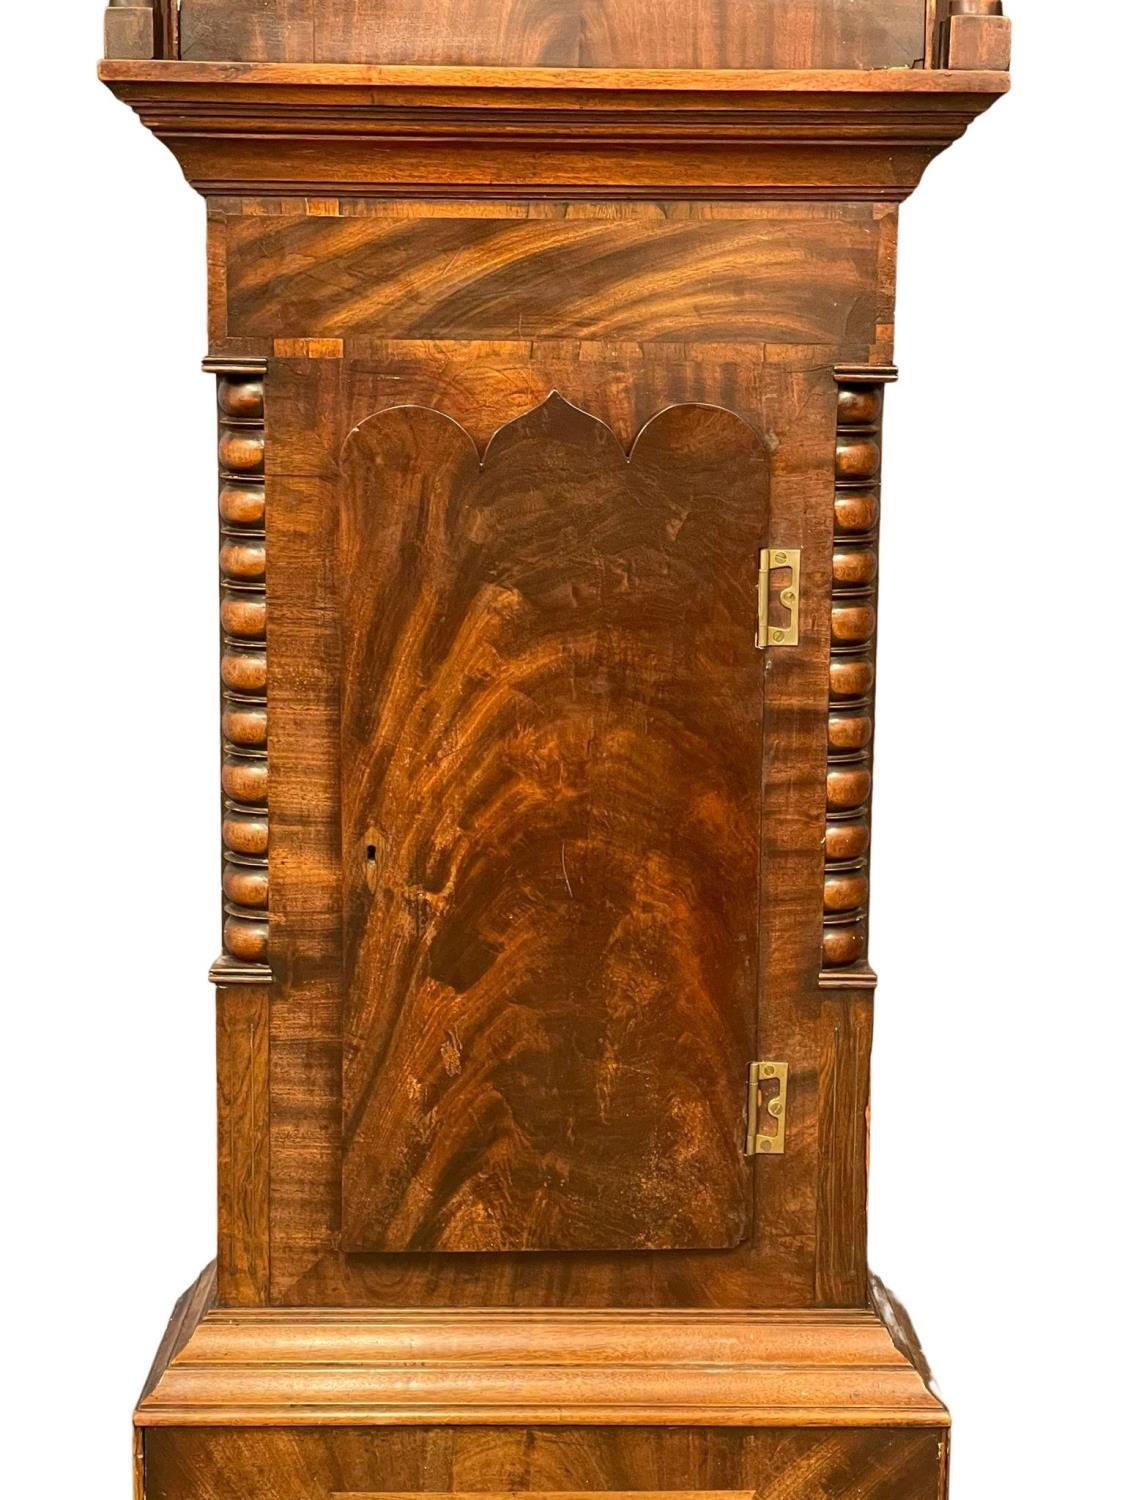 A large early Victorian mahogany long case clock with painted moon dial face. Circa 1835-1840. - Image 4 of 5